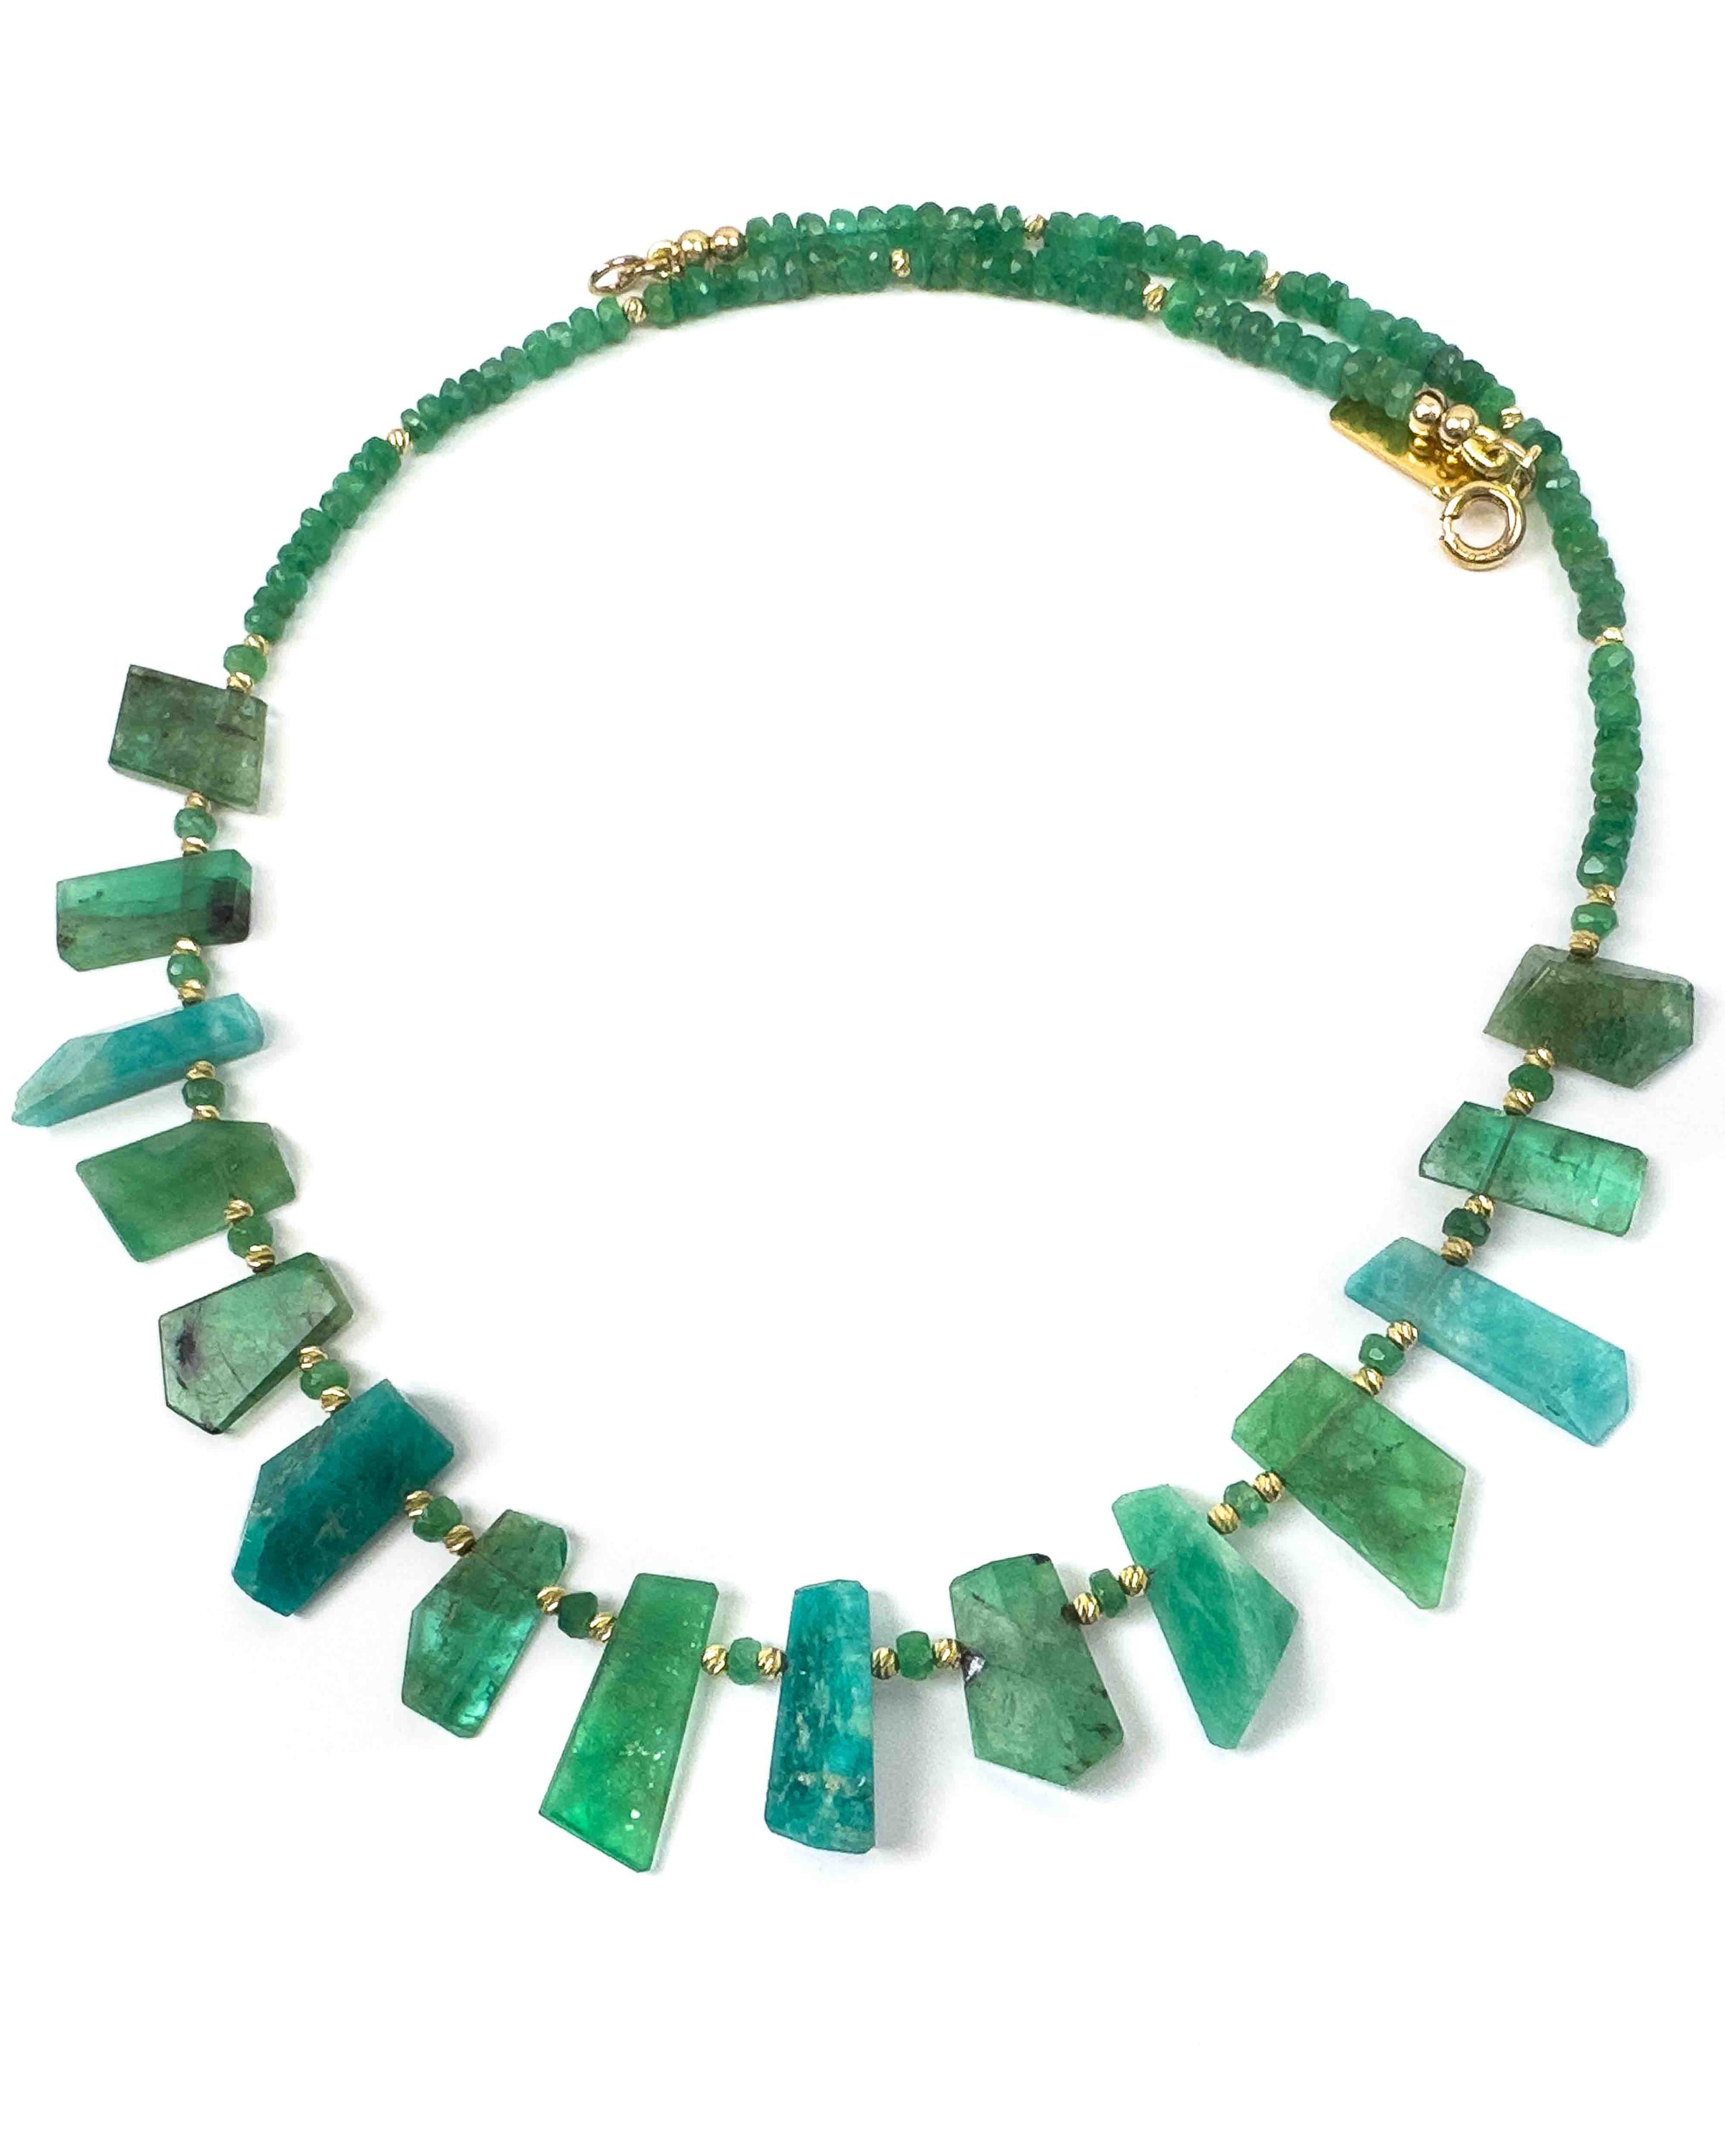 14k Gold Emerald & Amazonite Spike with Columbian Emerald Necklace